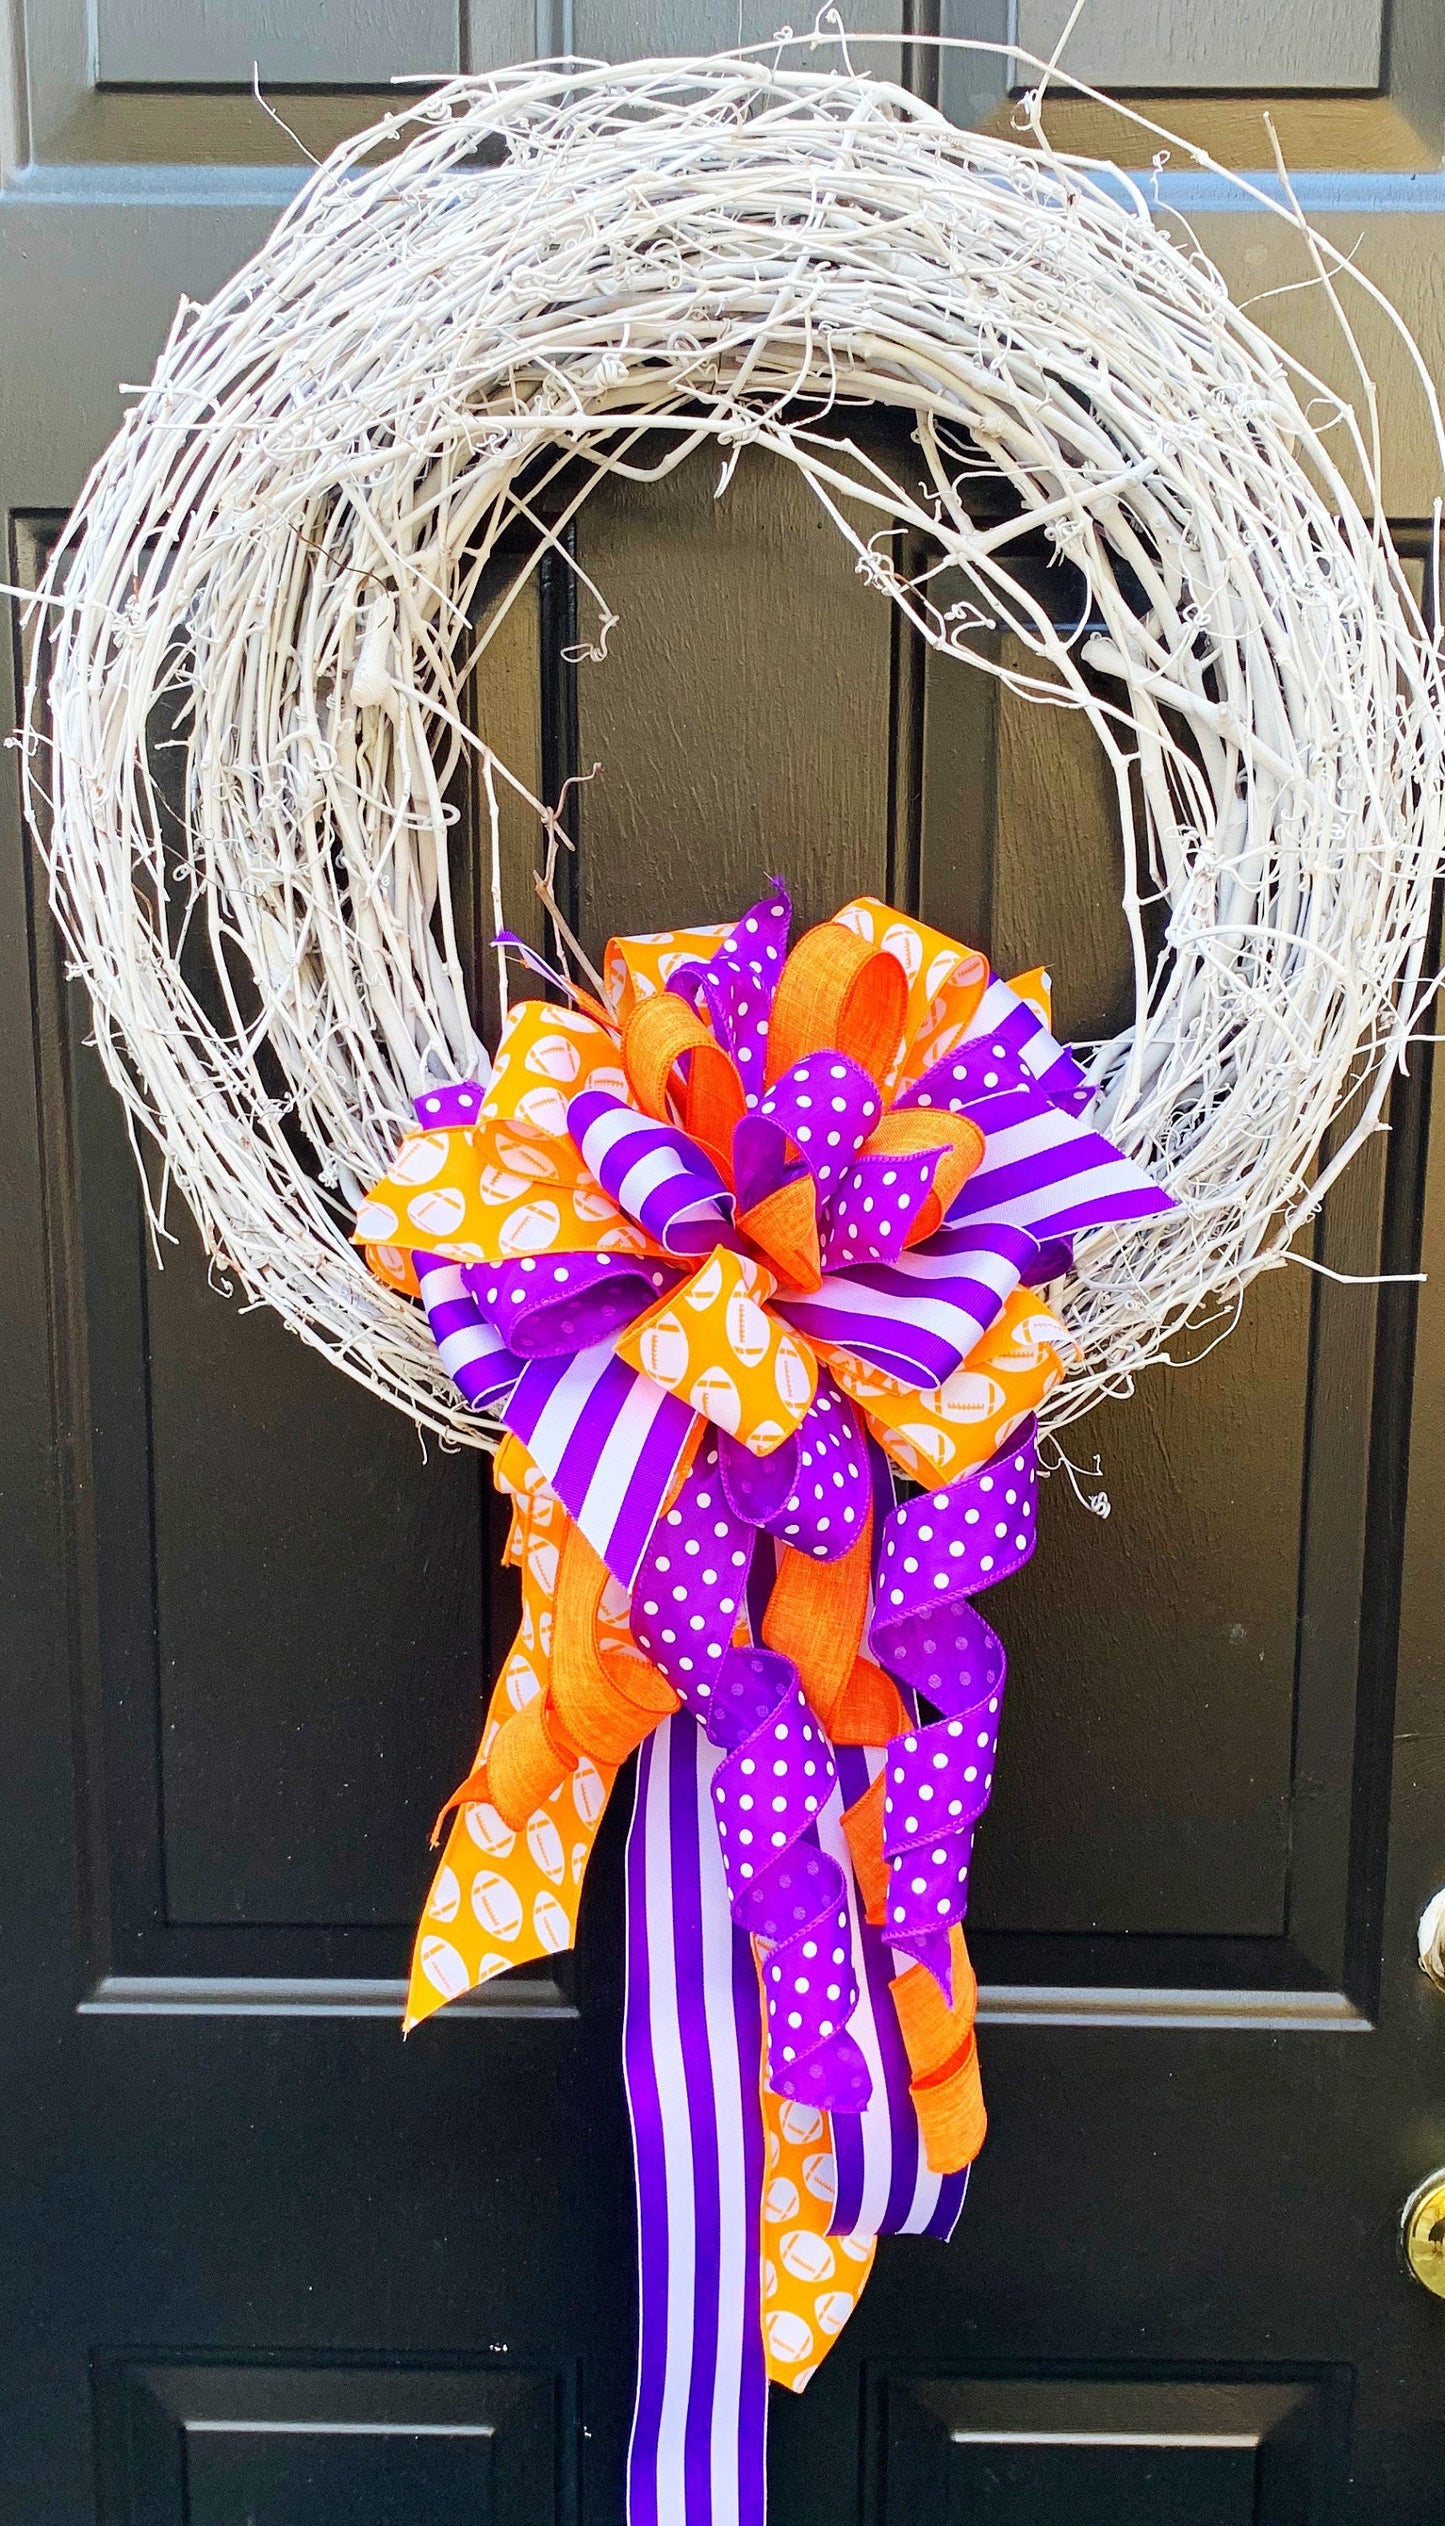 Sports Collection - Clemson, Clemson Bow, Clemson Ribbon, Mailbox Bow, Wreath Bow, Bows, Bow, Large Bow, Team Bow, Sports, Sports Bow